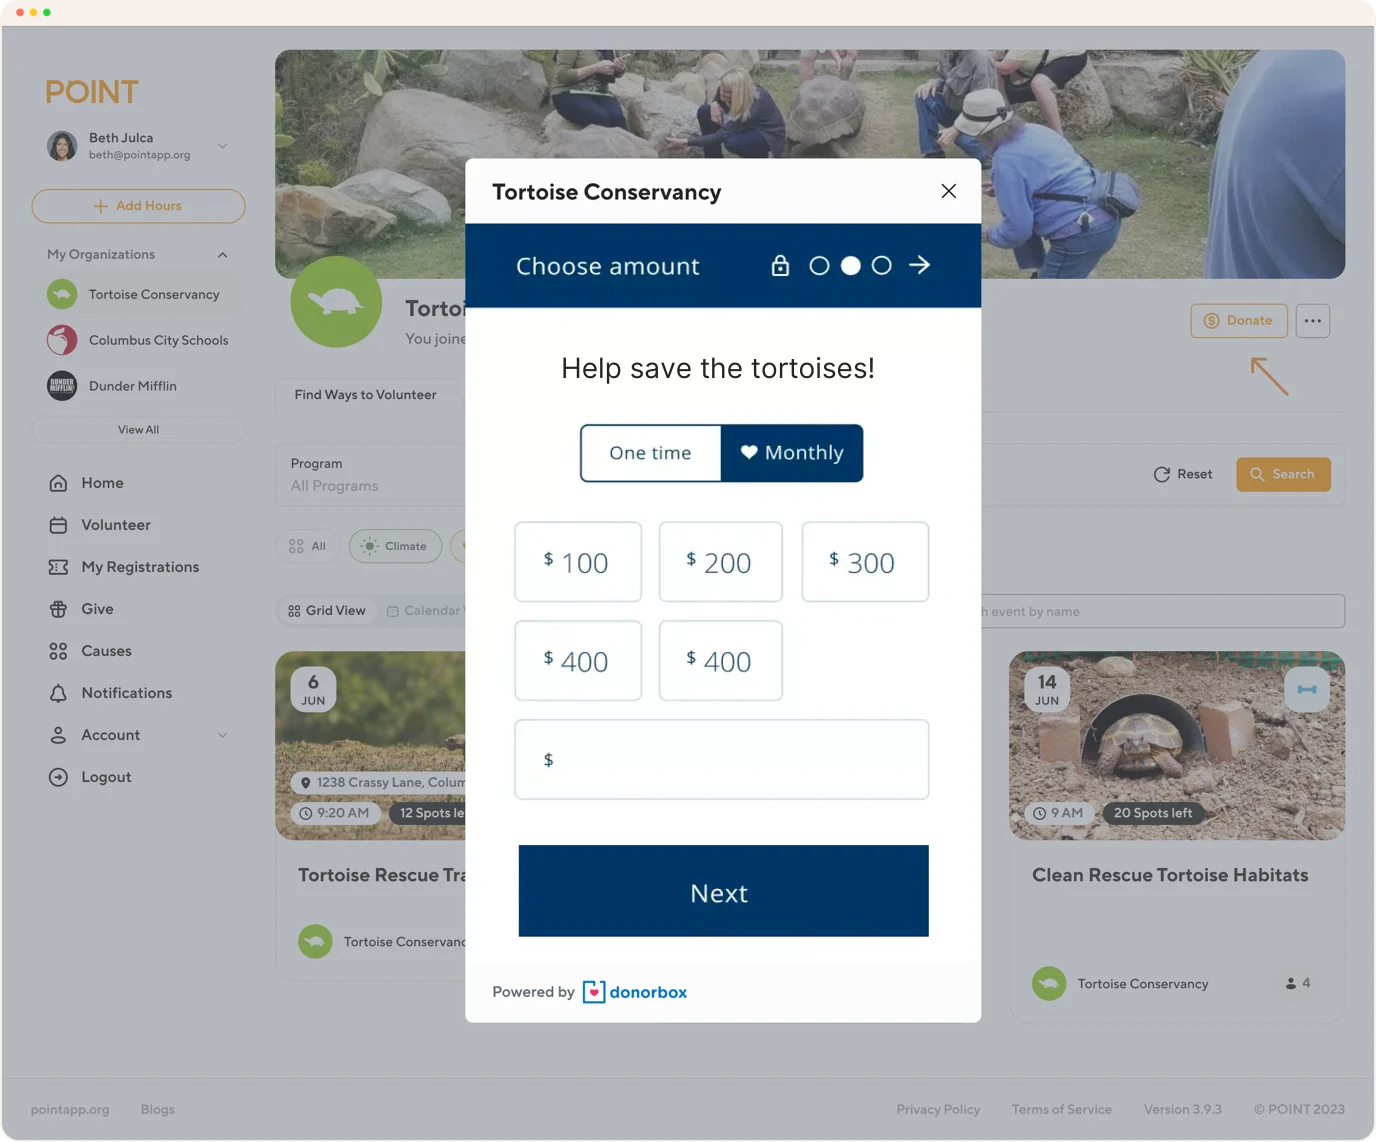 Example showing how Donorbox's donation form looks on POINT.